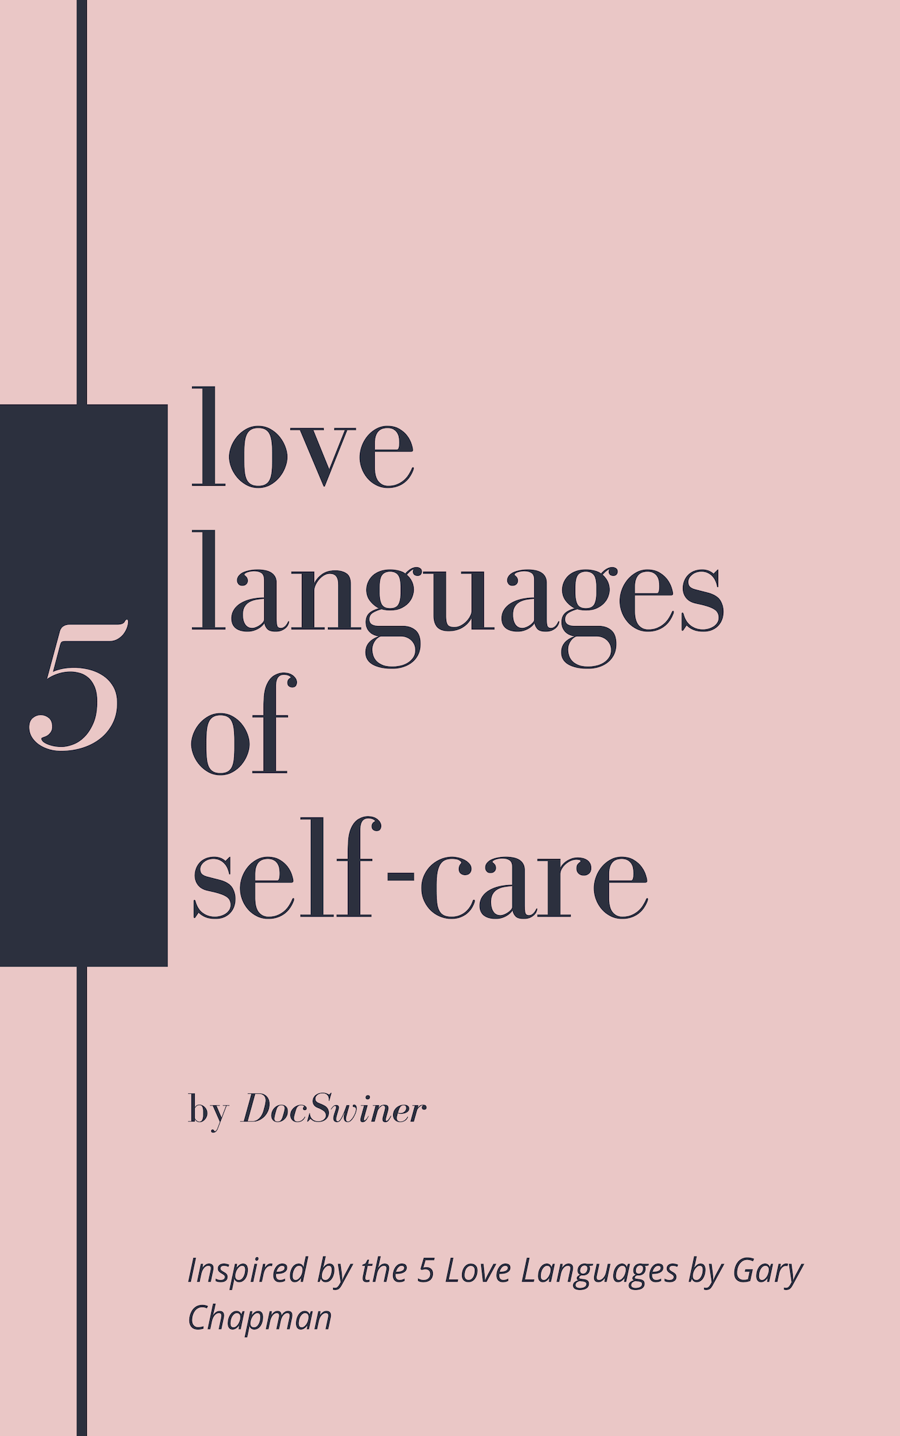 Image of  5 Love Languages of Self-Care E-book by DocSwiner